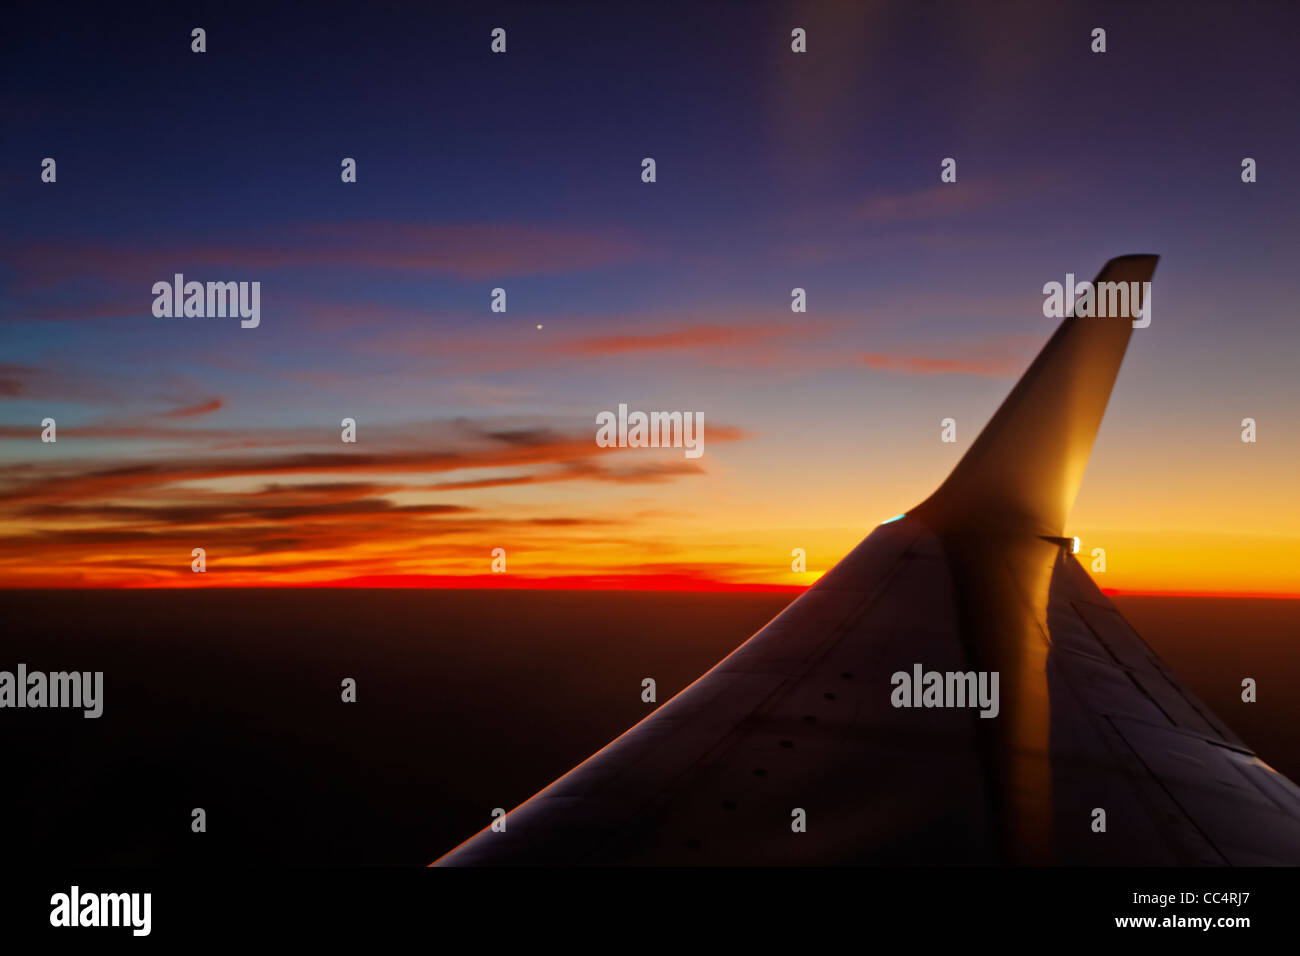 Horizontal, landscape of sundown over clouds of Asia flash cut by airoplane wing, colors, texture Stock Photo